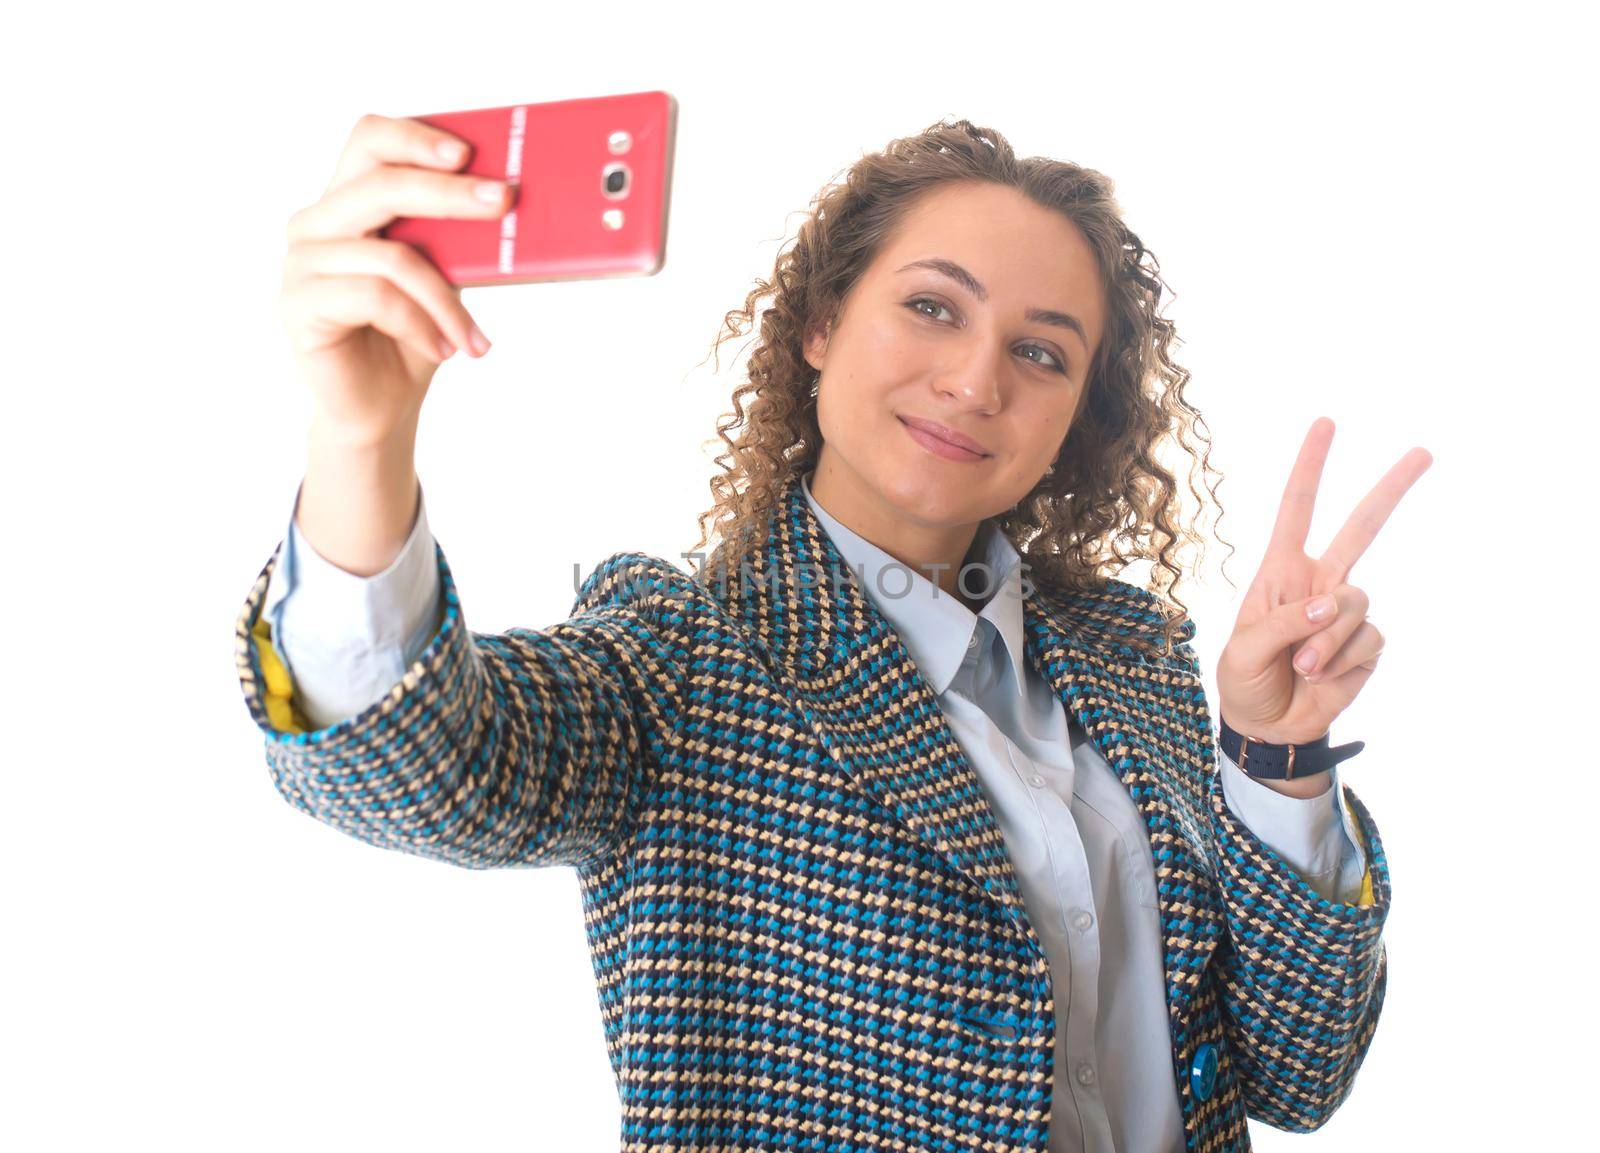 of a cute lovely woman taking selfie and showing peace sign with fingers over white background by aprilphoto